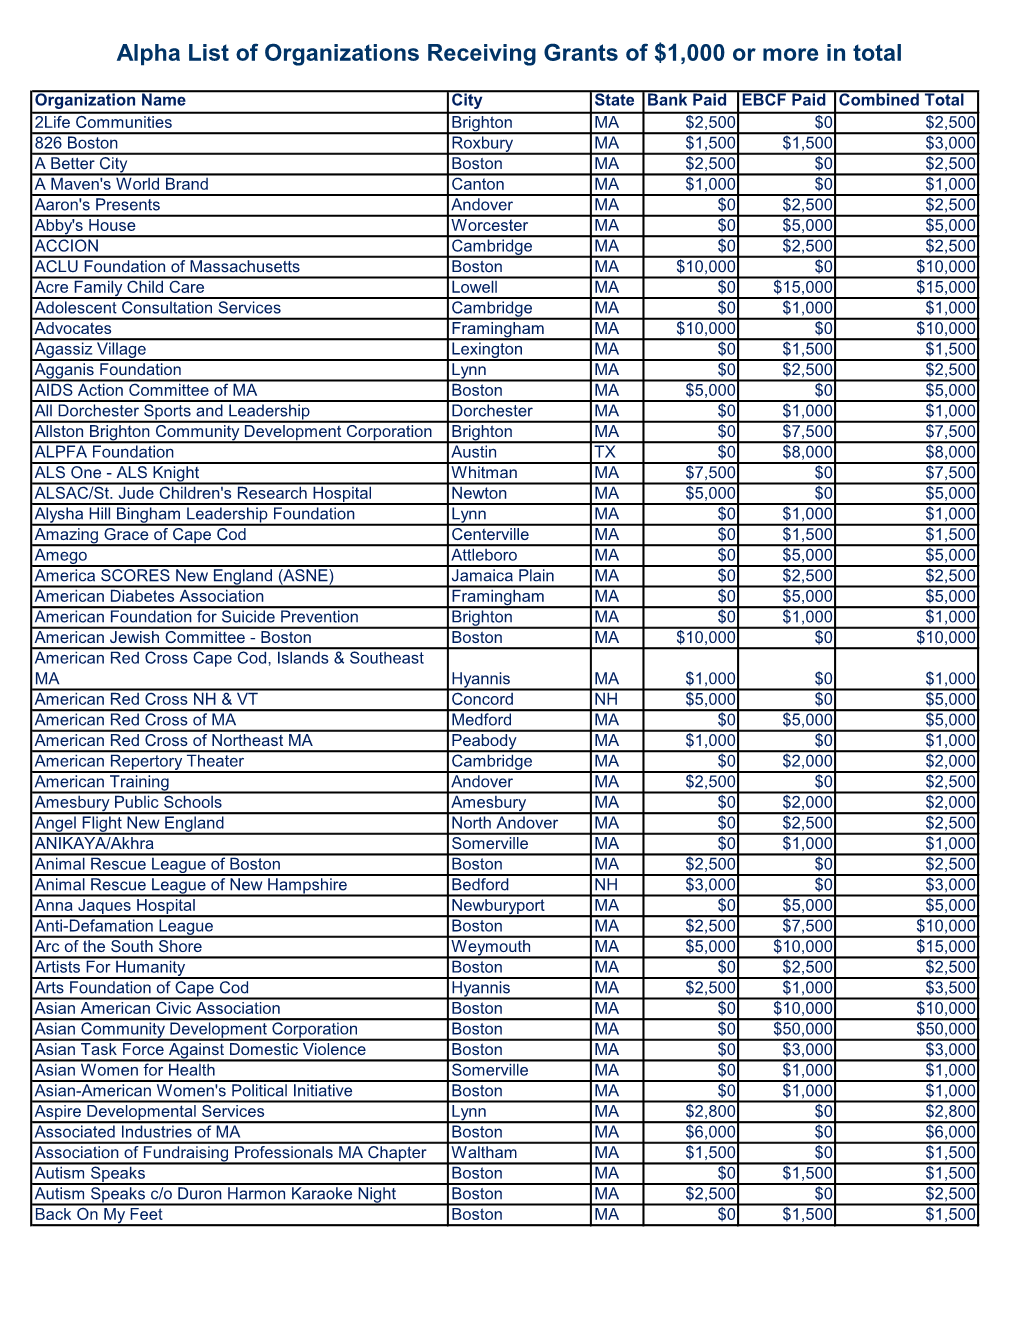 Alpha List of Organizations Receiving Grants of $1,000 Or More in Total